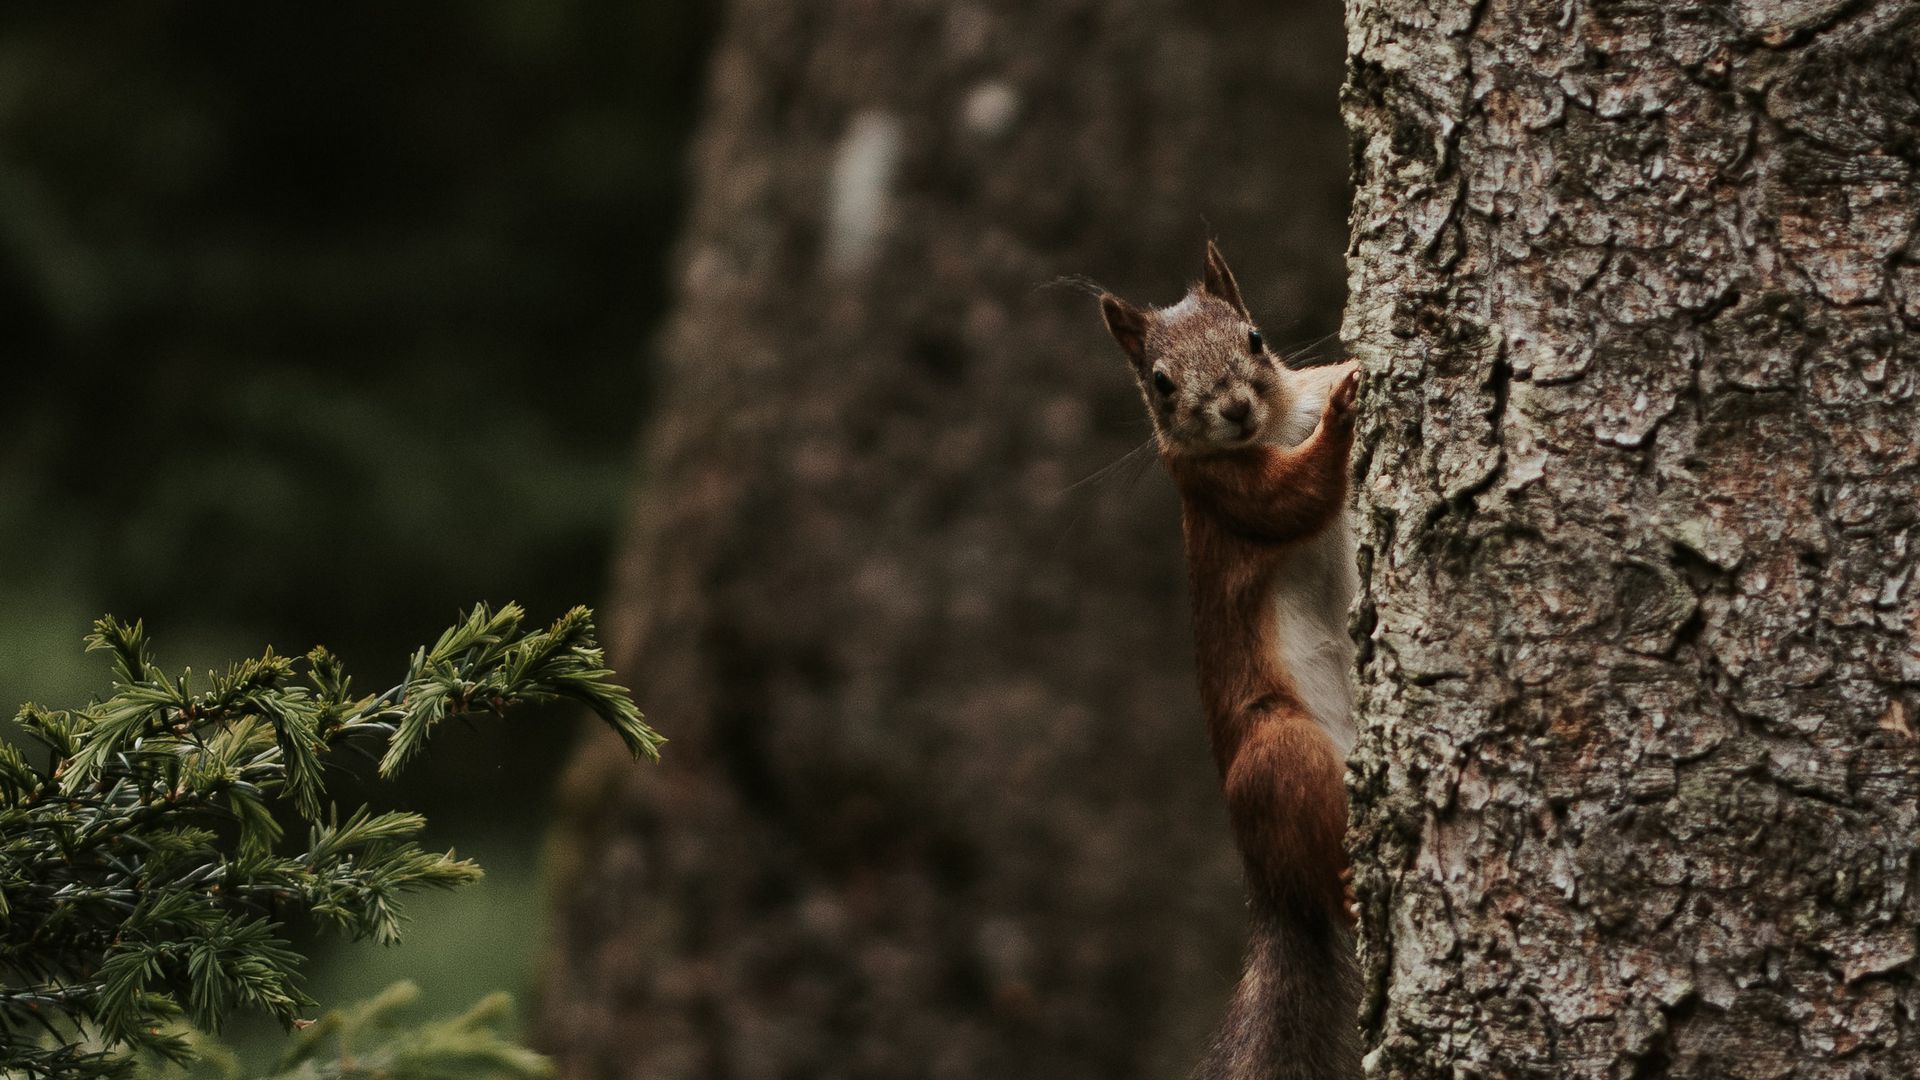 Download wallpaper 1920x1080 squirrel, rodent, funny, tree full hd